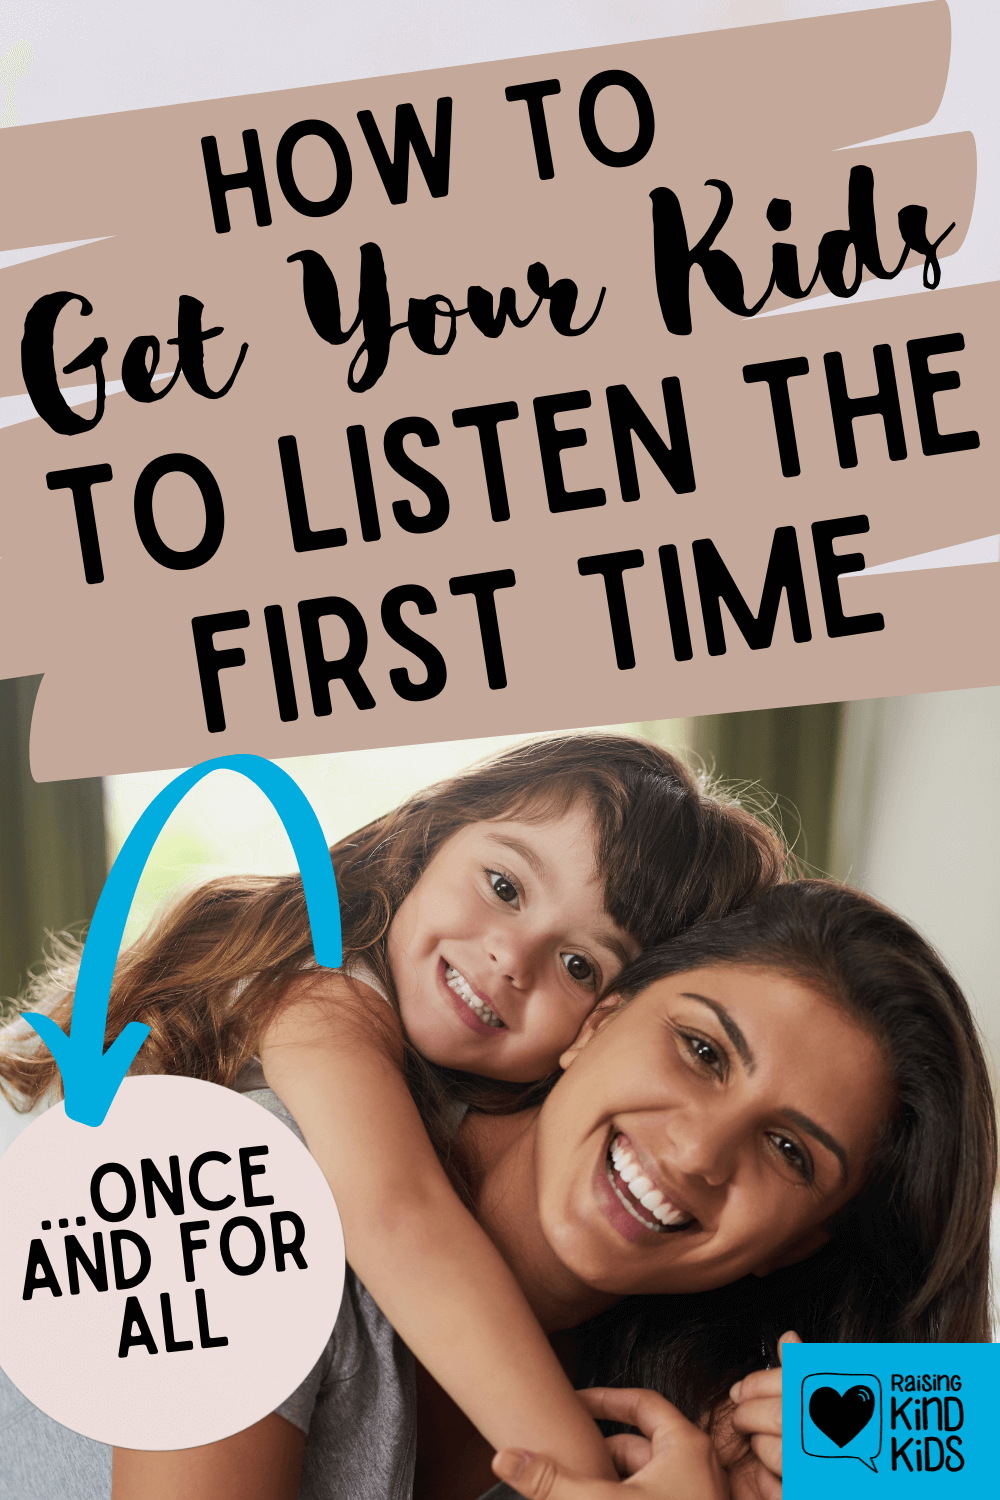 Are your kids not listening? Here's a simple trick to get kids to listen the first time you ask them with a free printable to help.